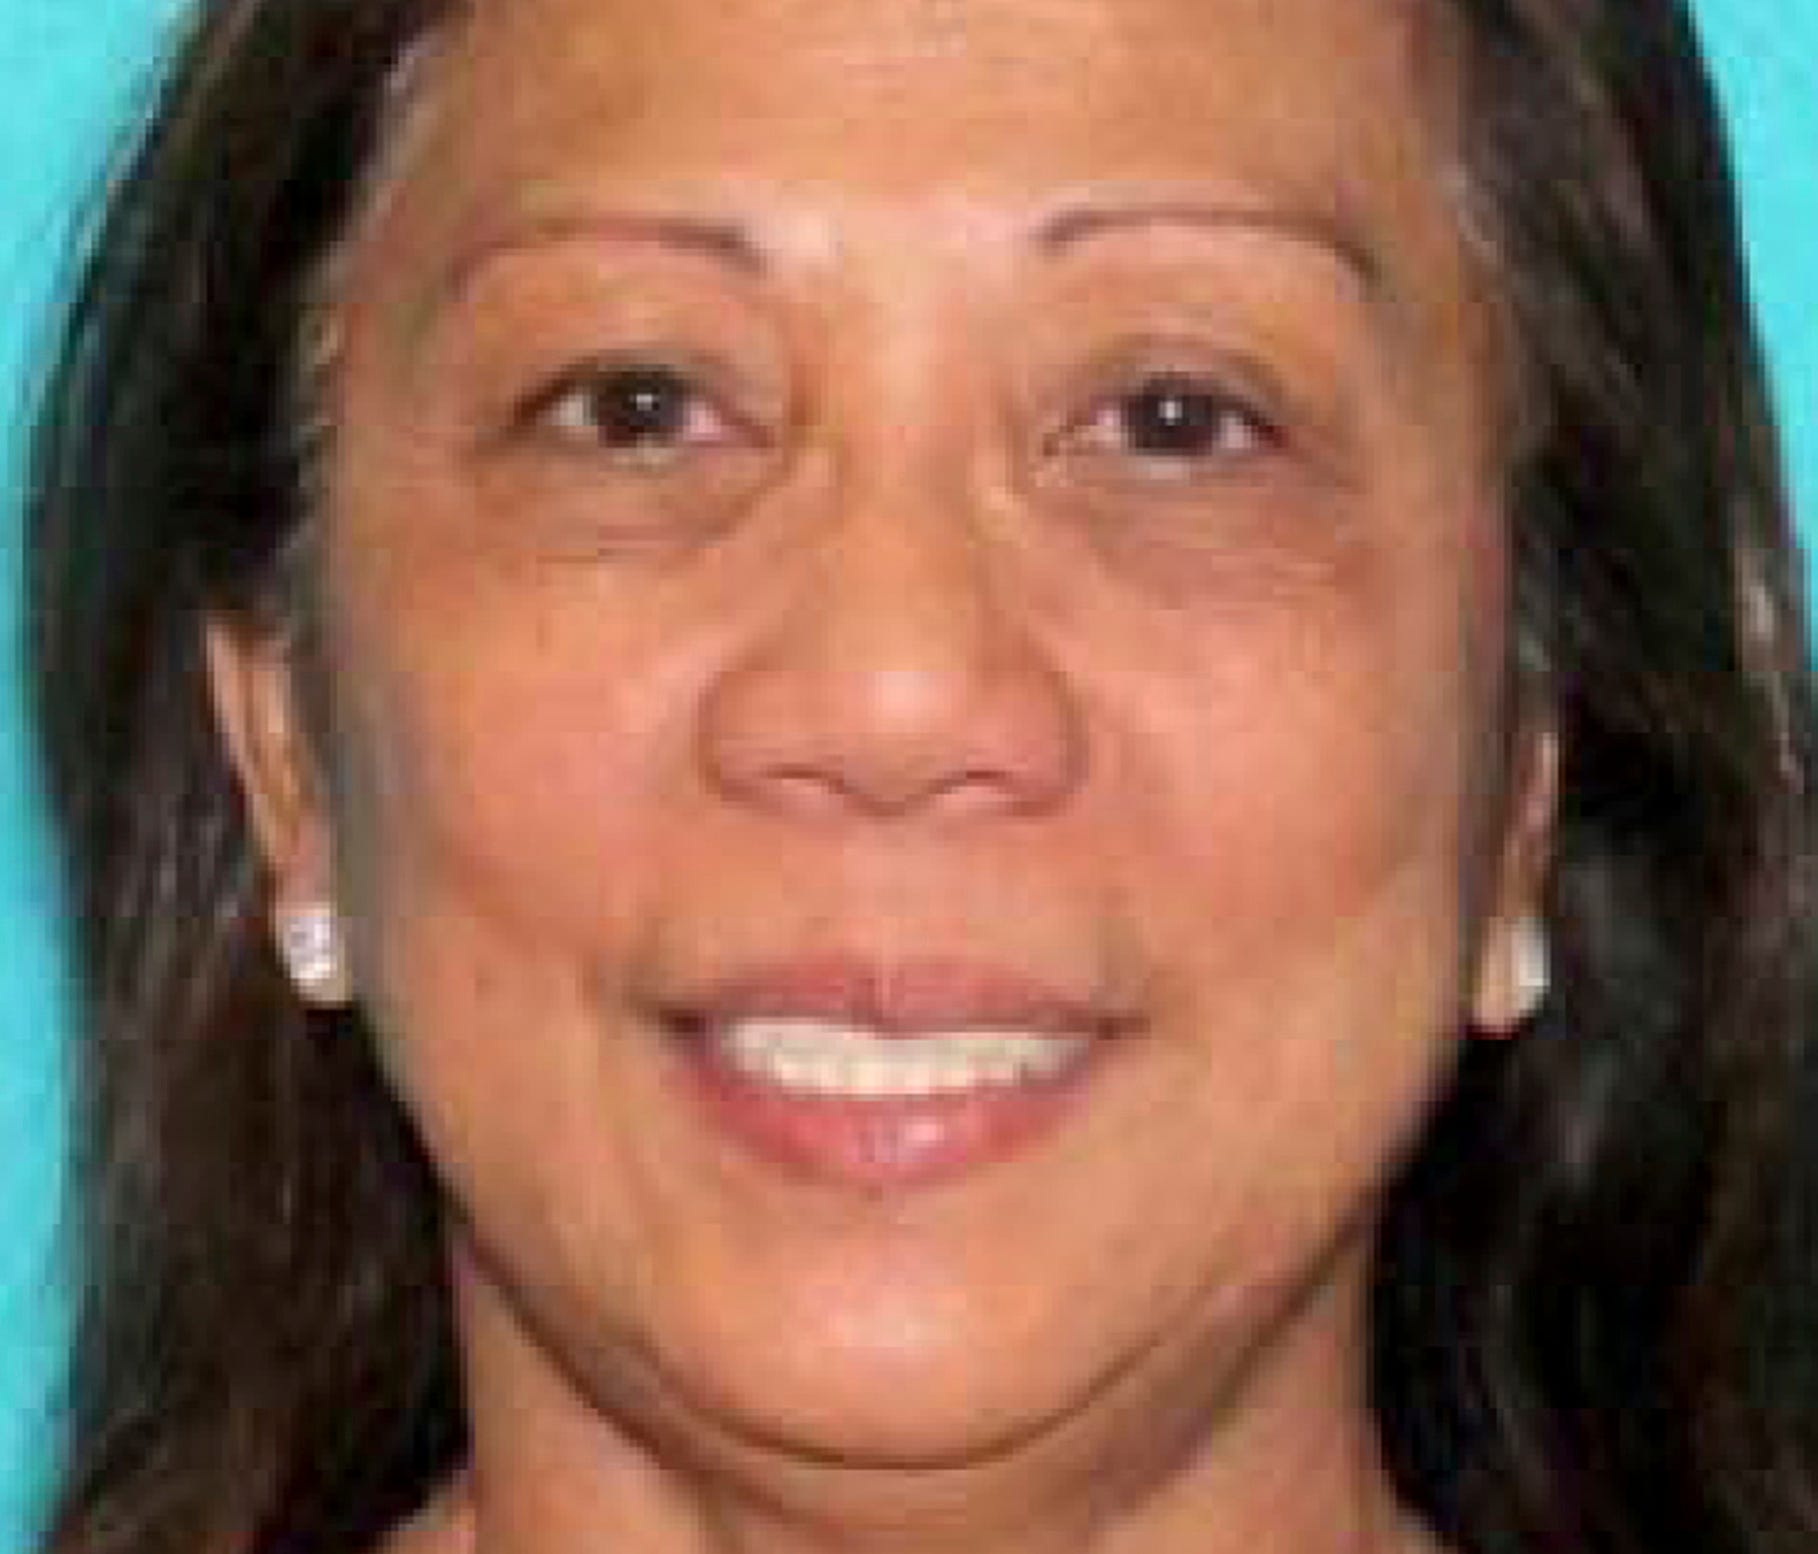 This undated photo provided by the Las Vegas Metropolitan Police Department shows Marilou Danley. Danley, 62, returned to the United States from the Philippines on Tuesday night, Oct. 3, 2017, and was met at Los Angeles International Airport by FBI a